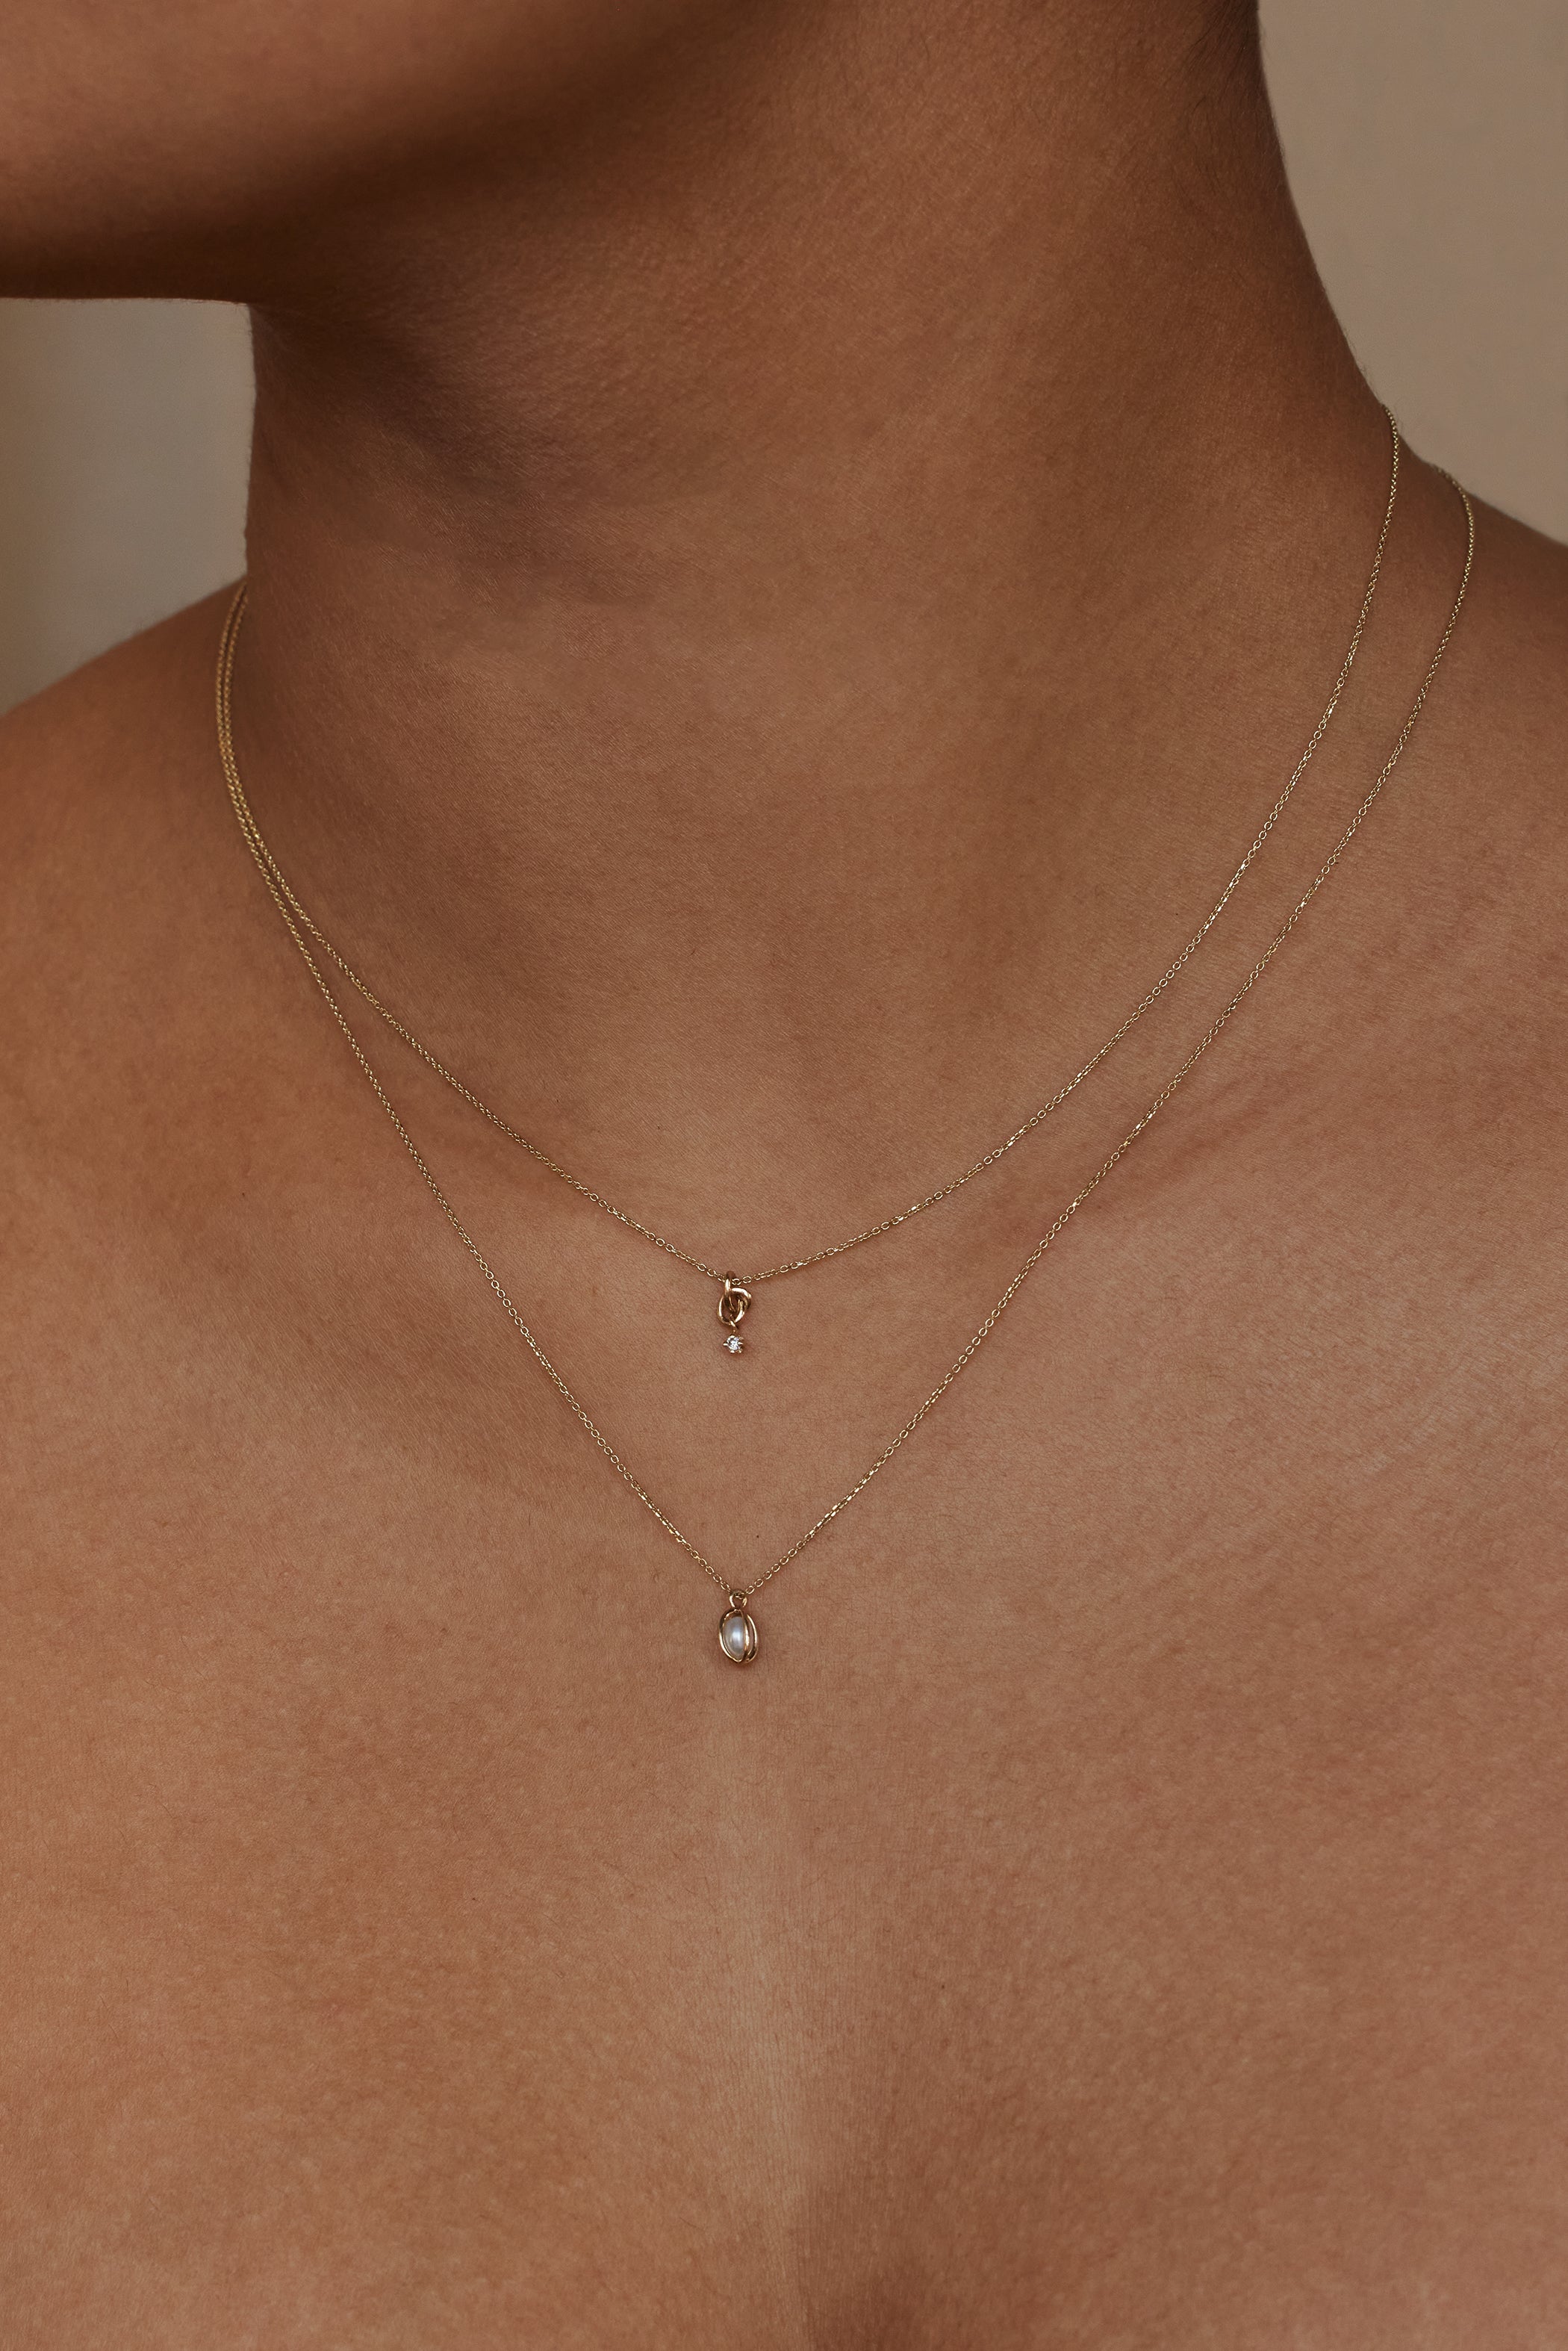 Caged Pearl Necklace Size 4mm 20 | WWAKE